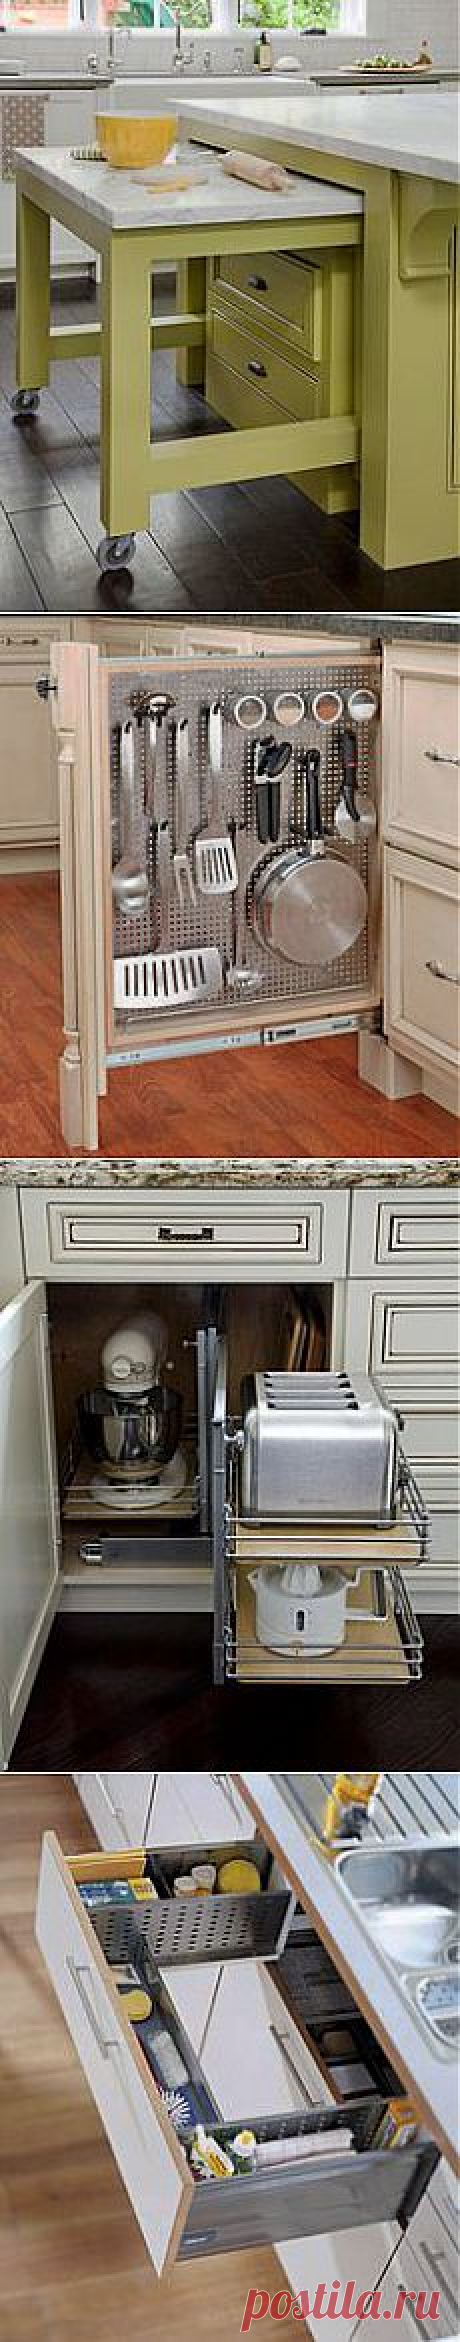 Custom Touches for Small Kitchens